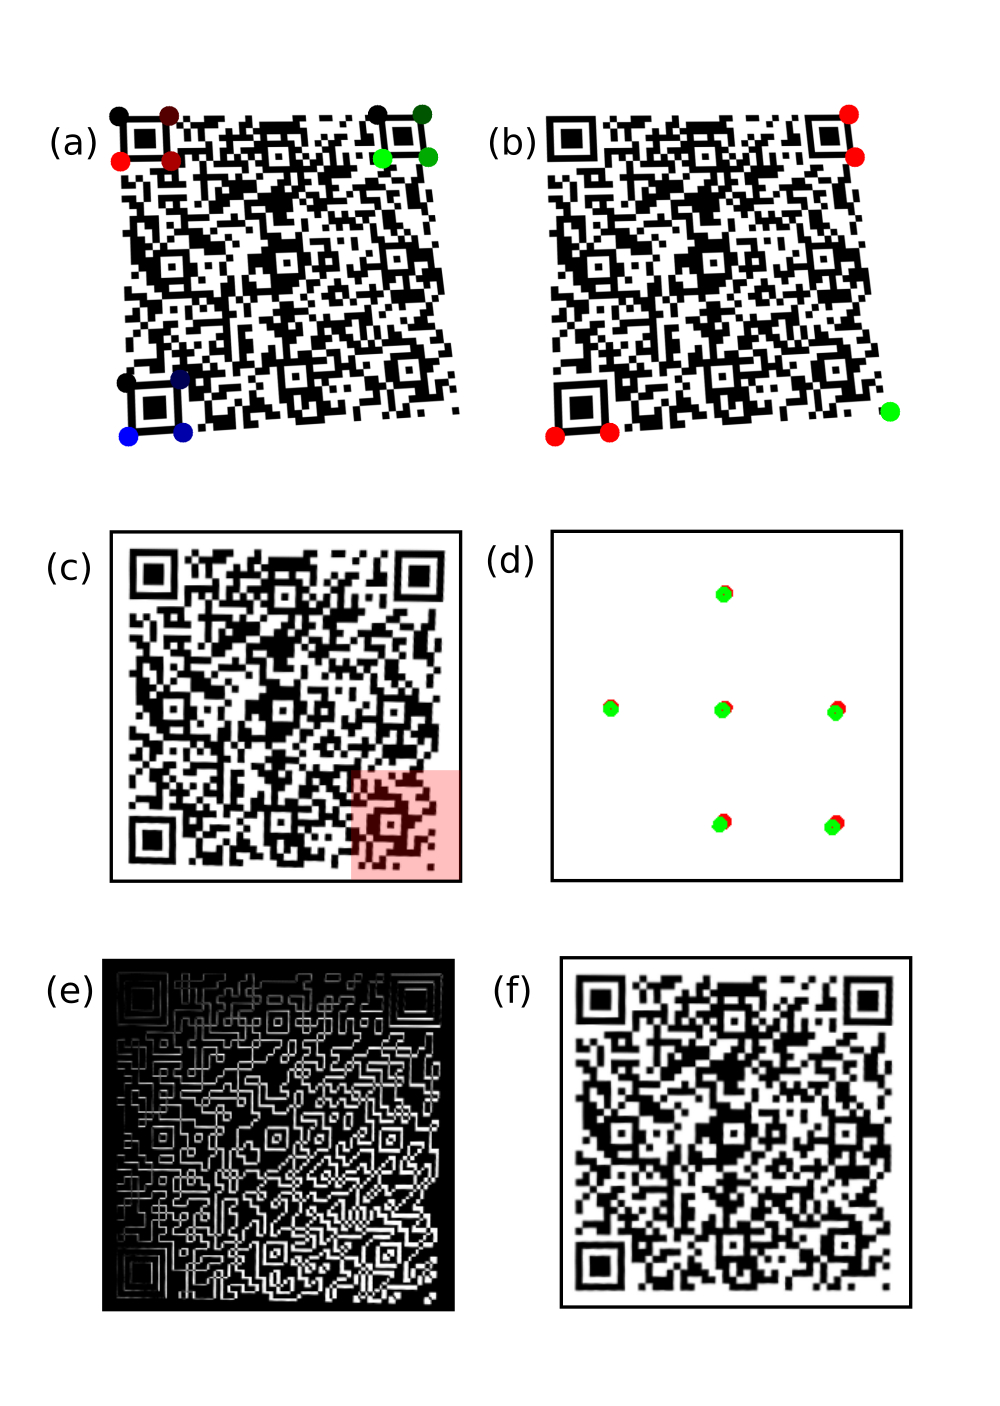 The QR Code projective correction steps. (a) The orientation is deduced from the centers of the 3 finder patterns L, \ M, \ N. In this step, their contour corners are found. (b) The fourth corner O is found, based on the previous three corners. (c) A first projective transformation is carried out, but still subject to significant error shifts around the bottom-right corner; (d) The alignment patterns are localized in a restricted contour search. The centers of the alignment patters (shifted centers after the first projective correction (green) and the reference centers are both found (red). (e) The error committed at this stage is shown by subtraction of the images. (f) Finally, a second projective transformation recovers the final QR Code image, based on the reference, tabulated, positions of the alignment patterns.